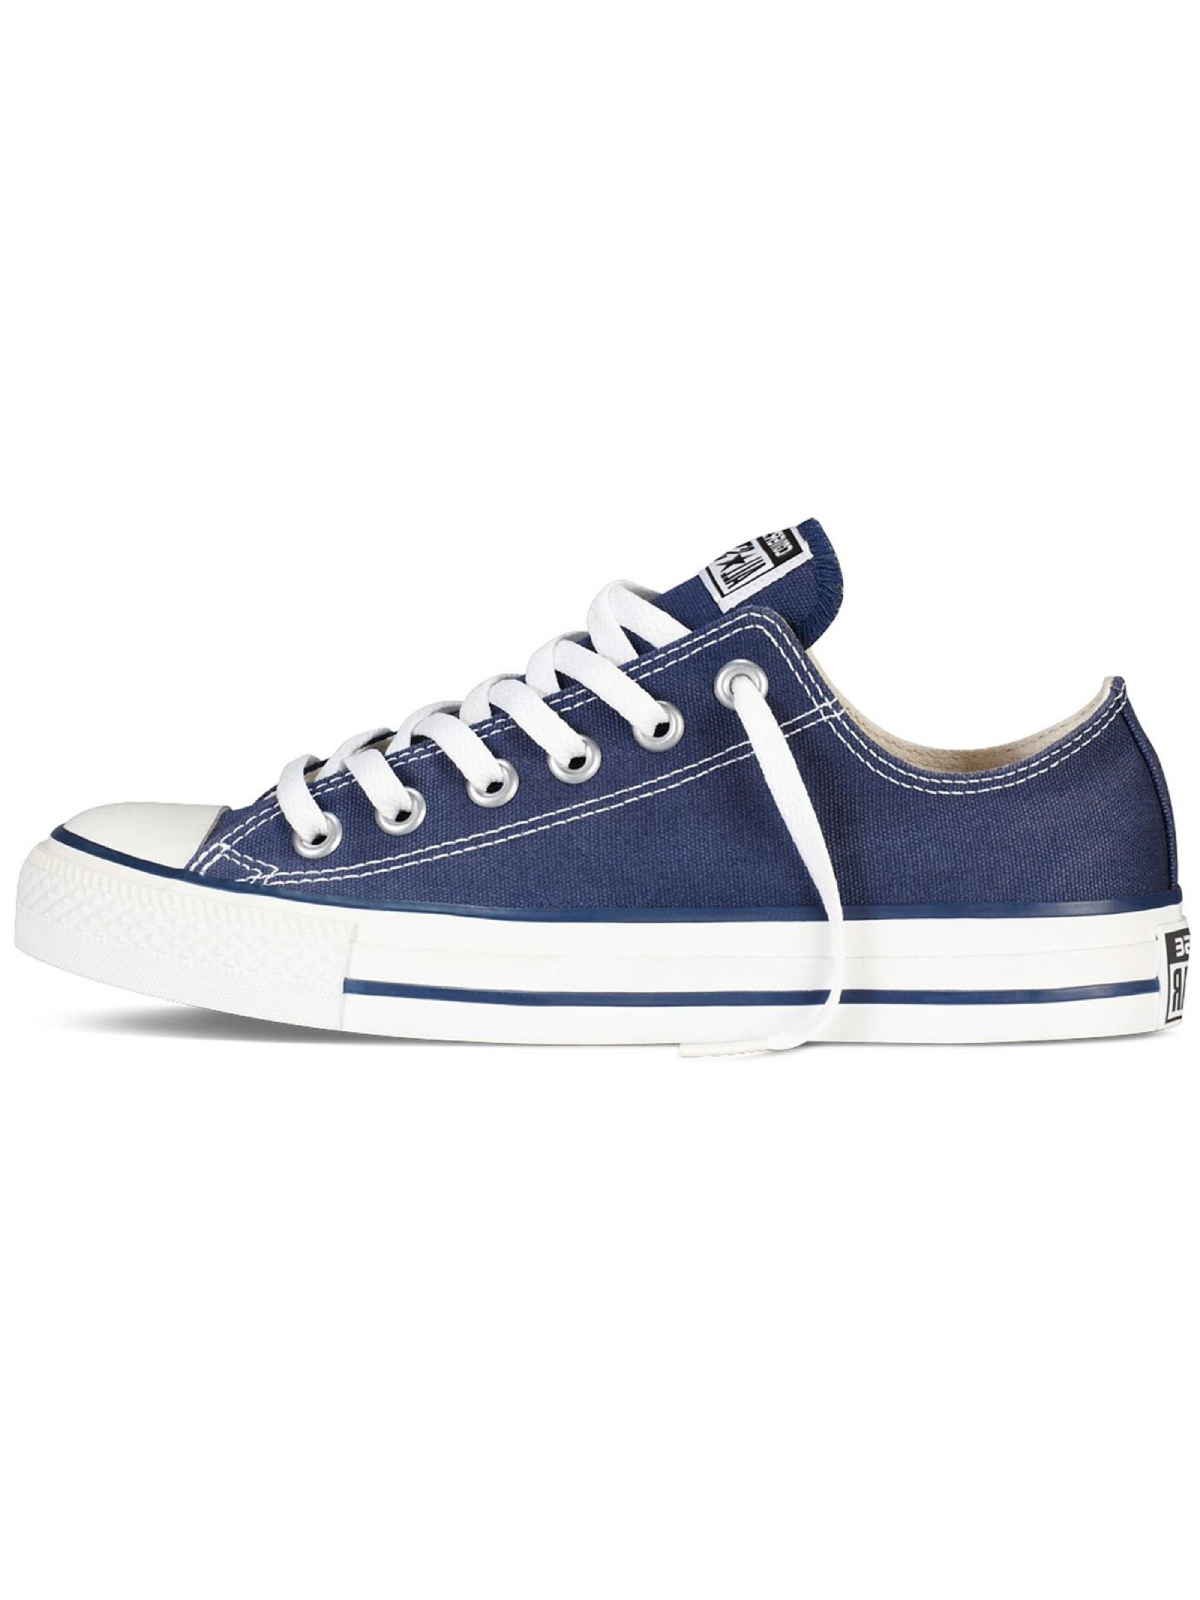 Unisex  Converse | All Star Chuck Taylor Ox| Shoes